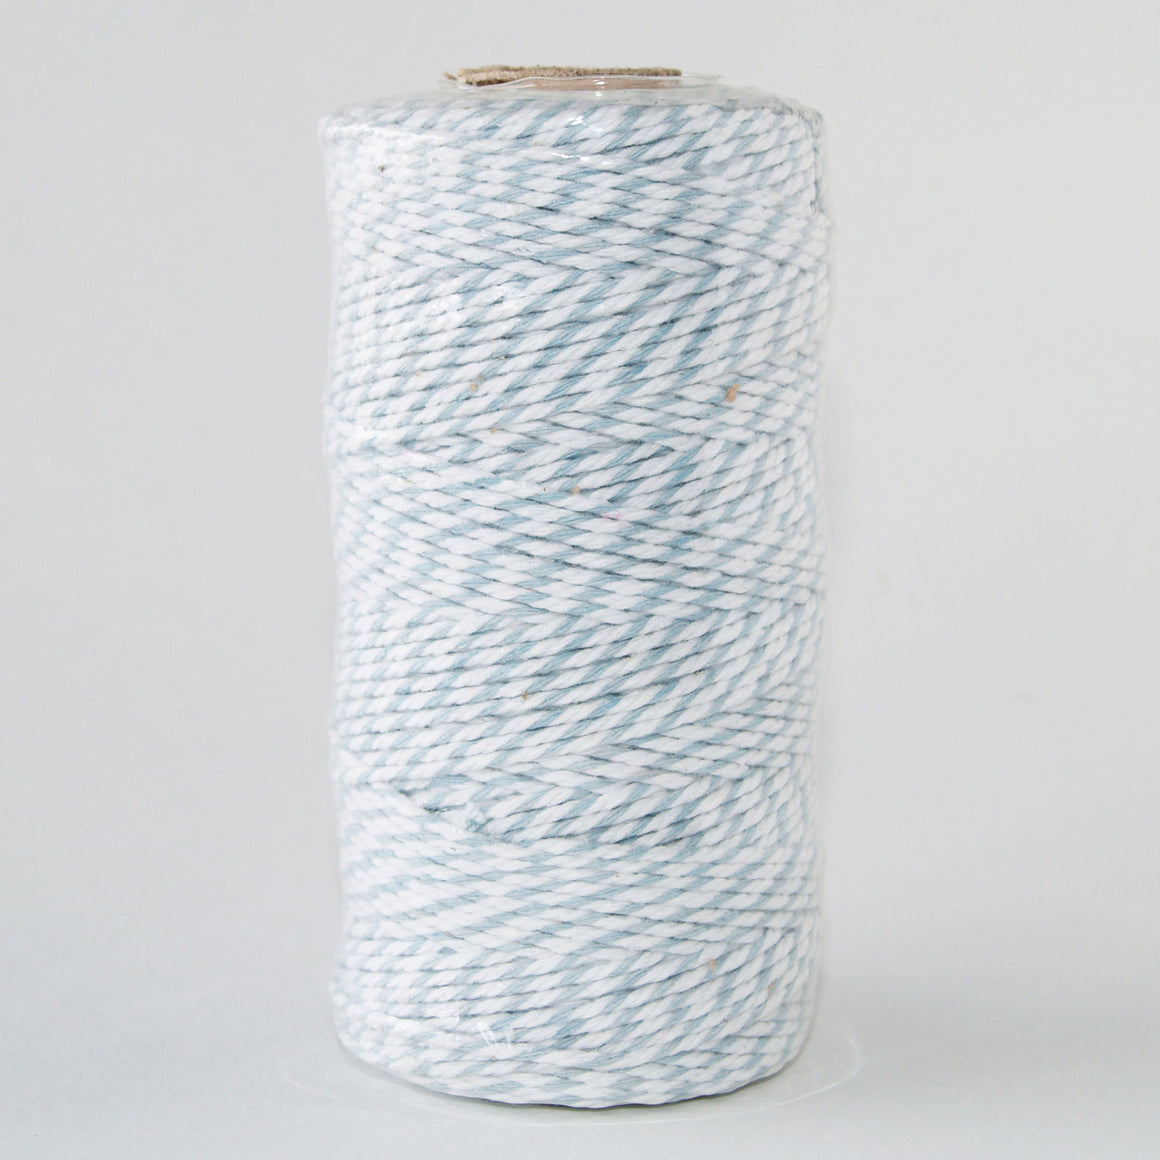 Bakers Twine French Blue and White